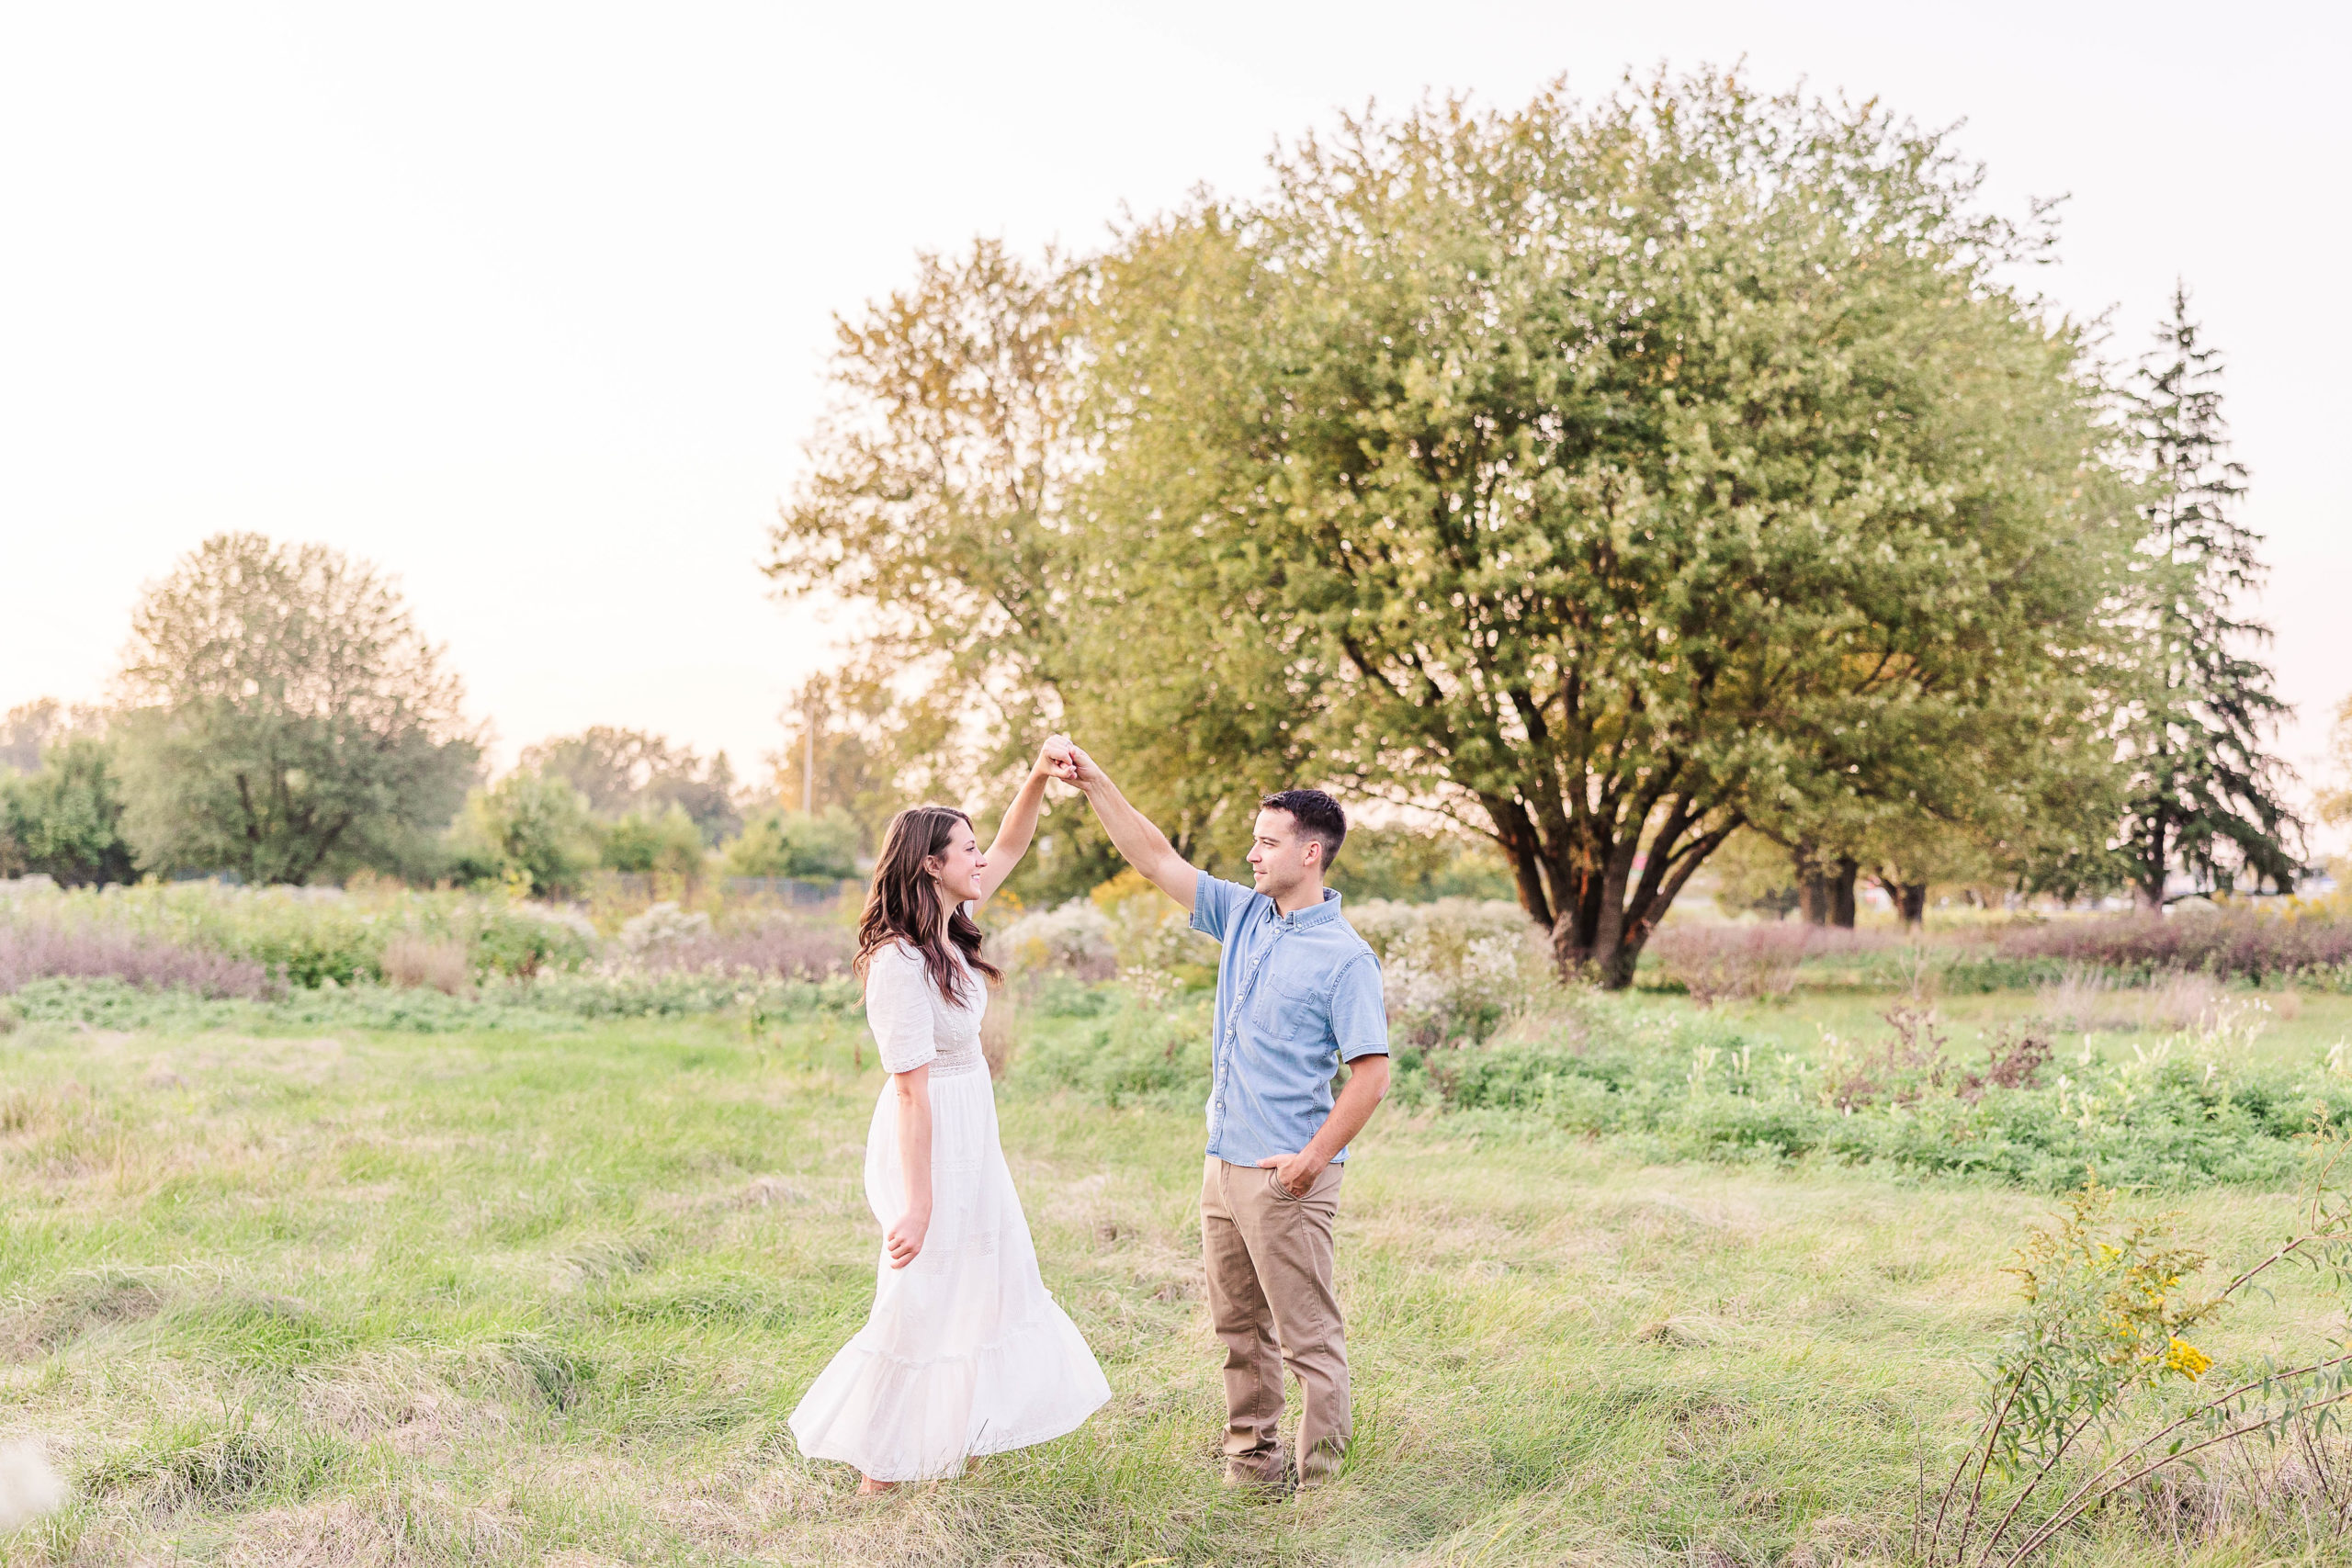 Engagement session in a Field of summer wildflowers.